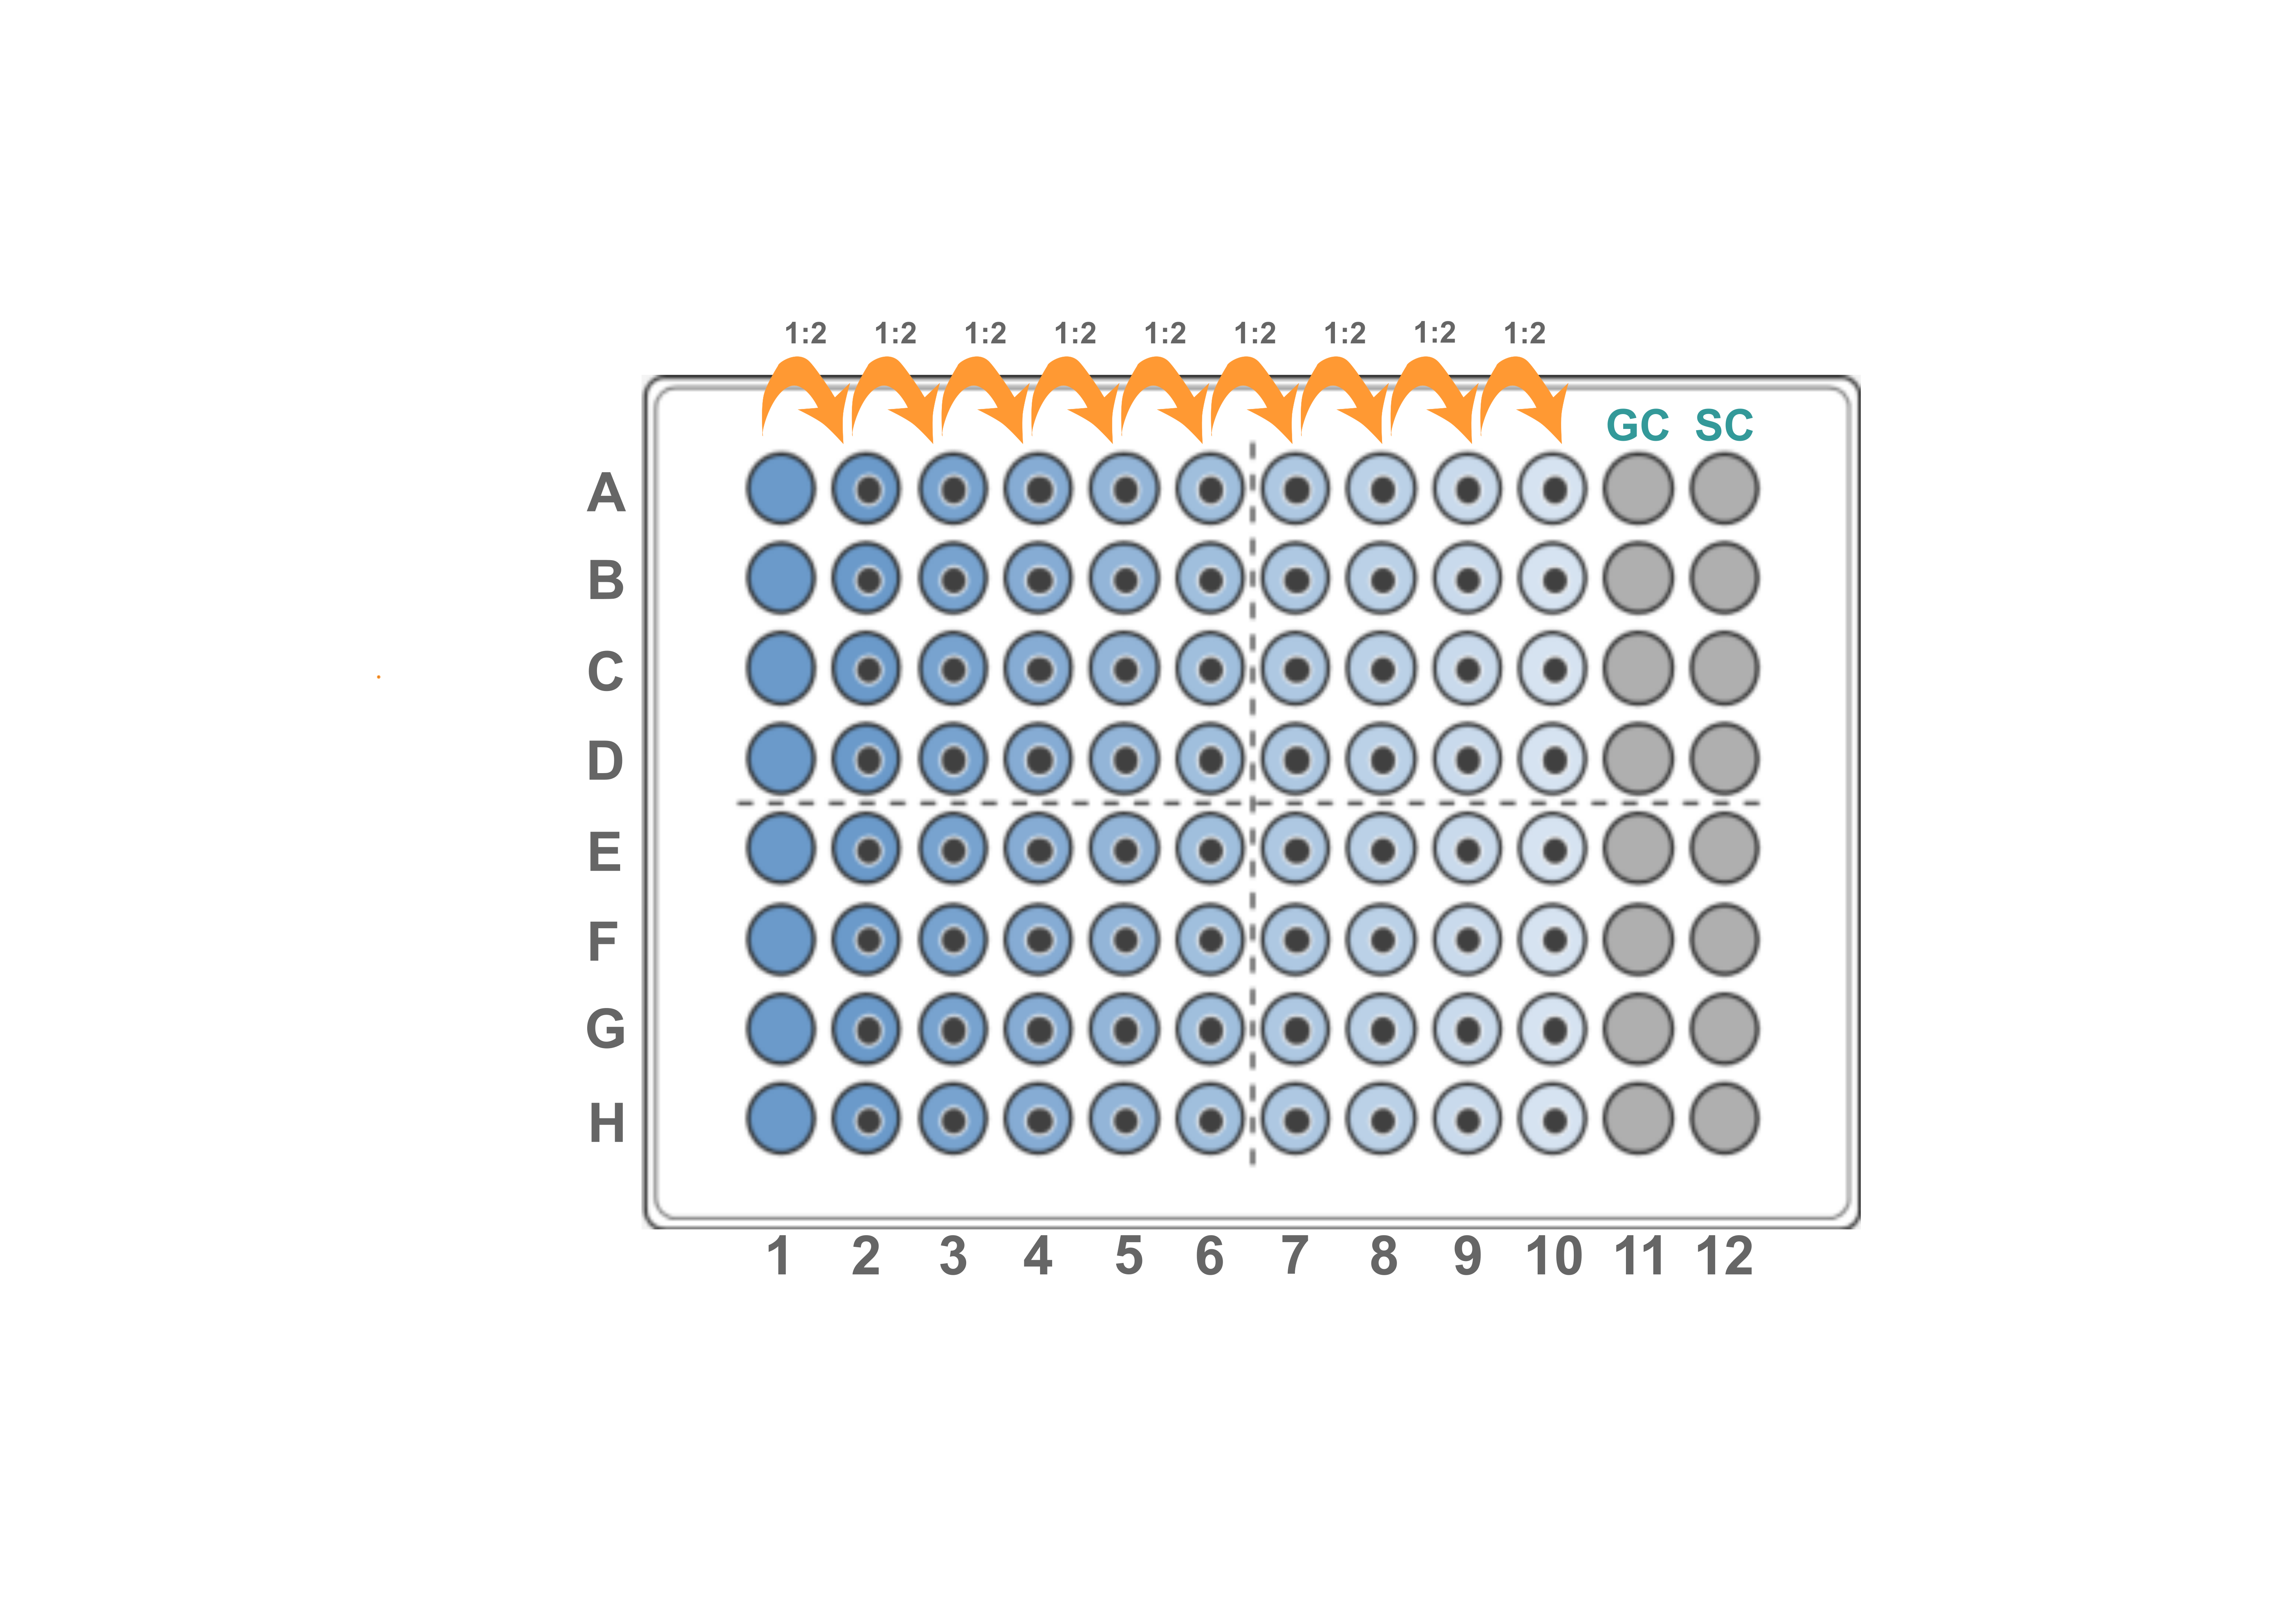 Schematic representation of the 10x twofold serial dilution (GC: growth control, SC: sterility control).